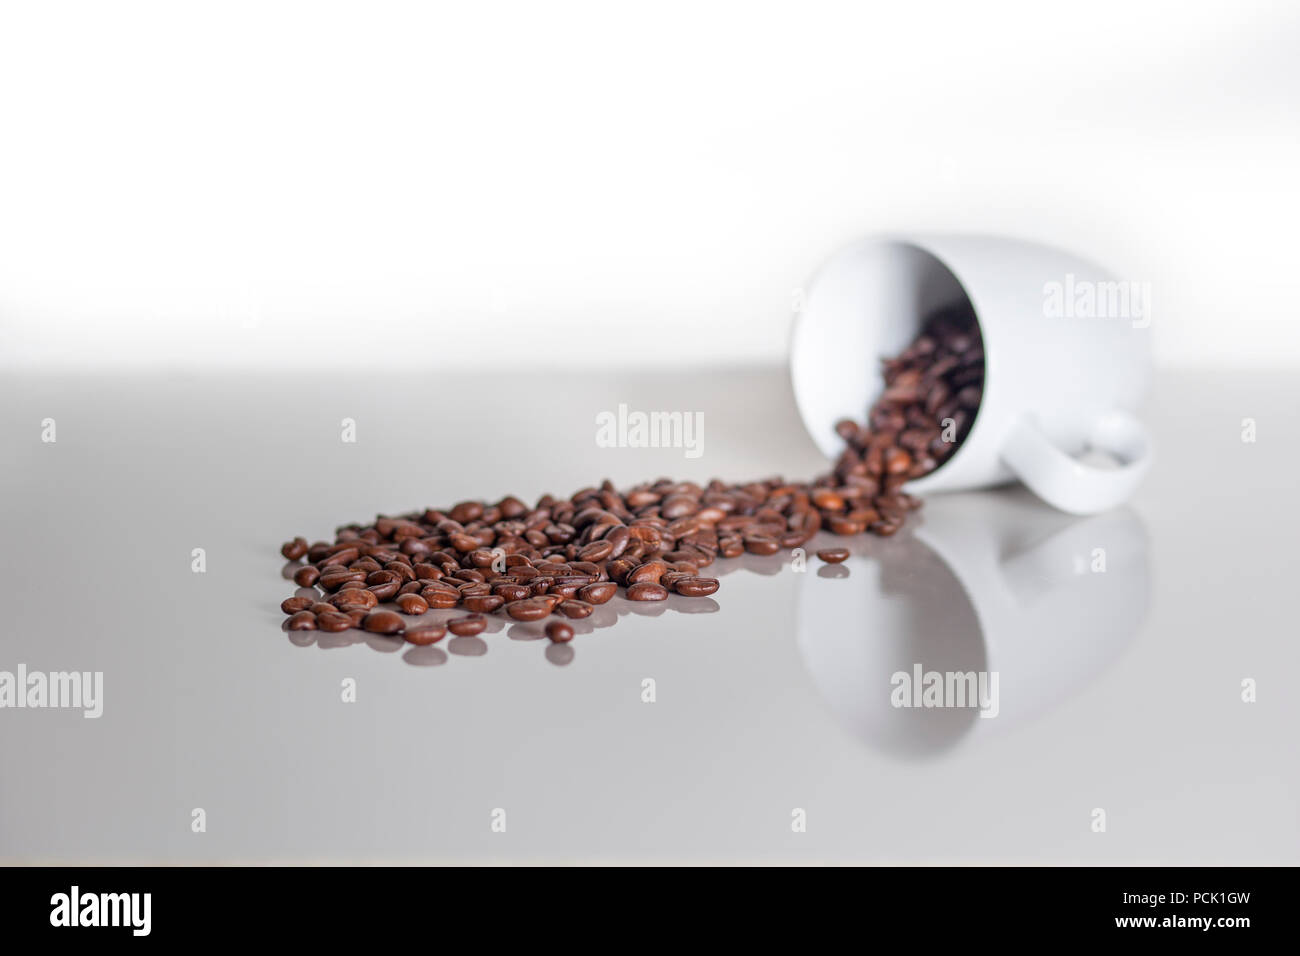 Many coffee coffee beans spilling out of a cup on a white counterspace with textspace Stock Photo